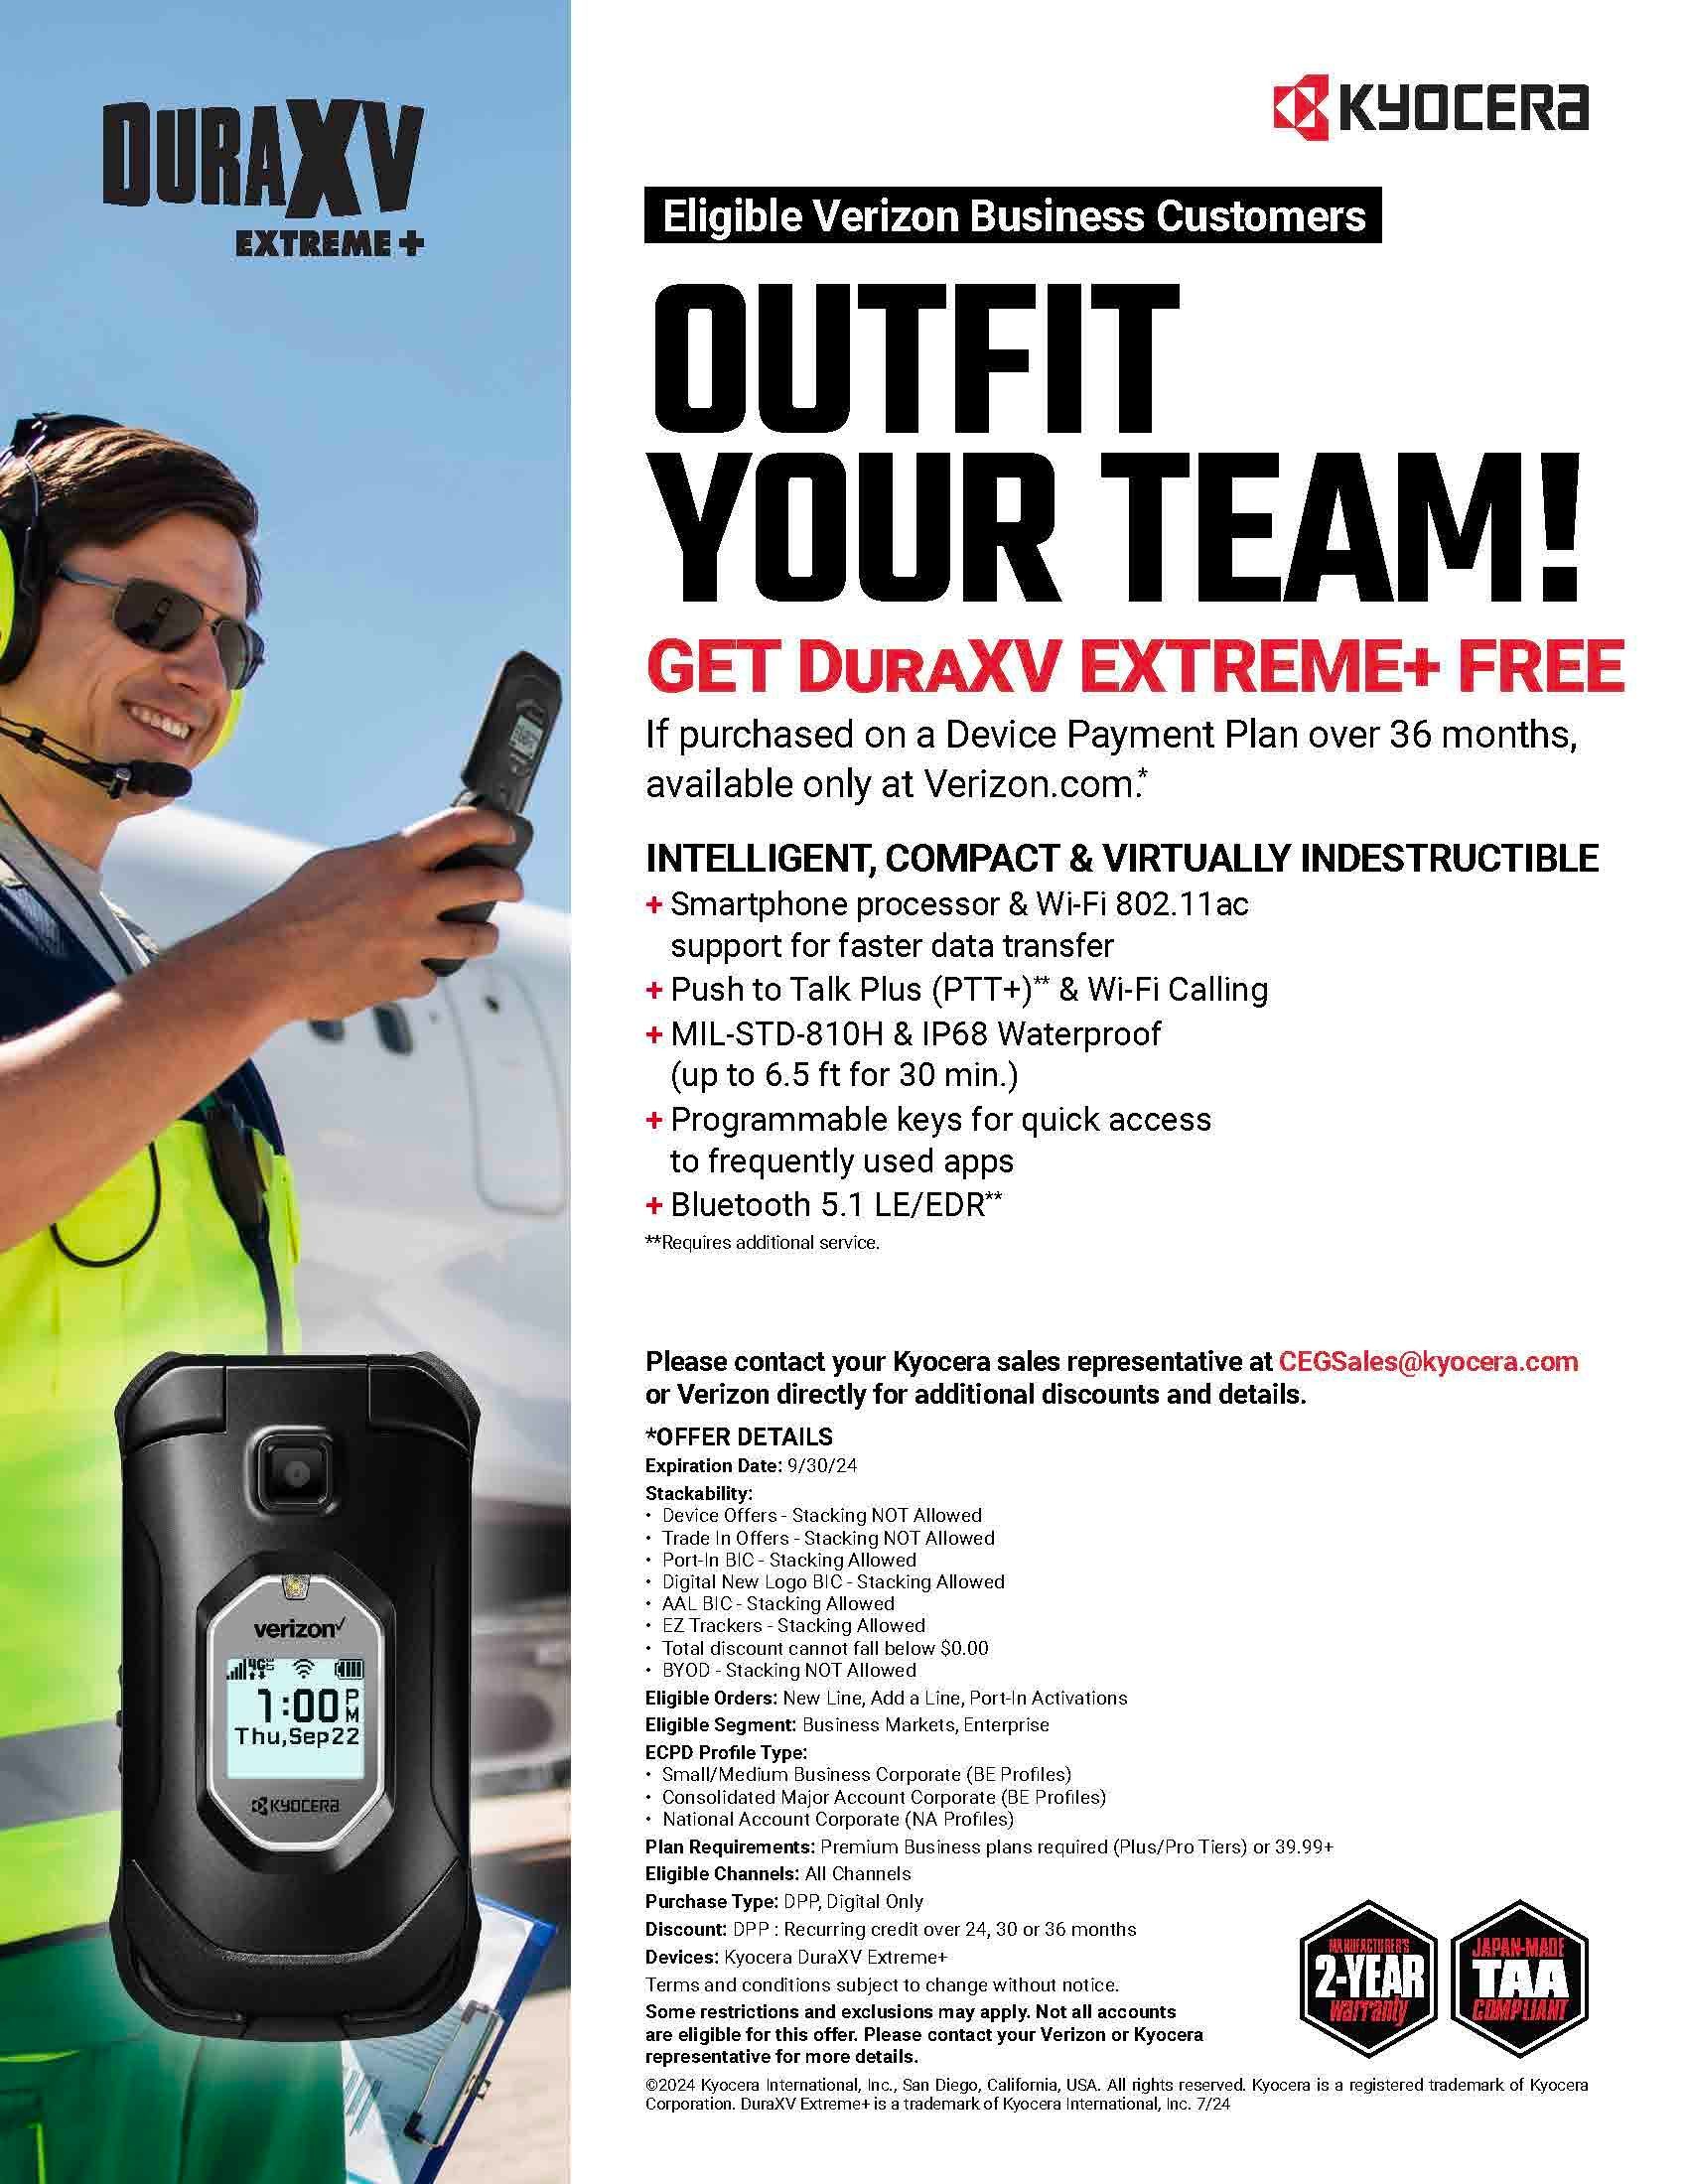 An advertisement for a flip phone that says `` outfit your team ! ''